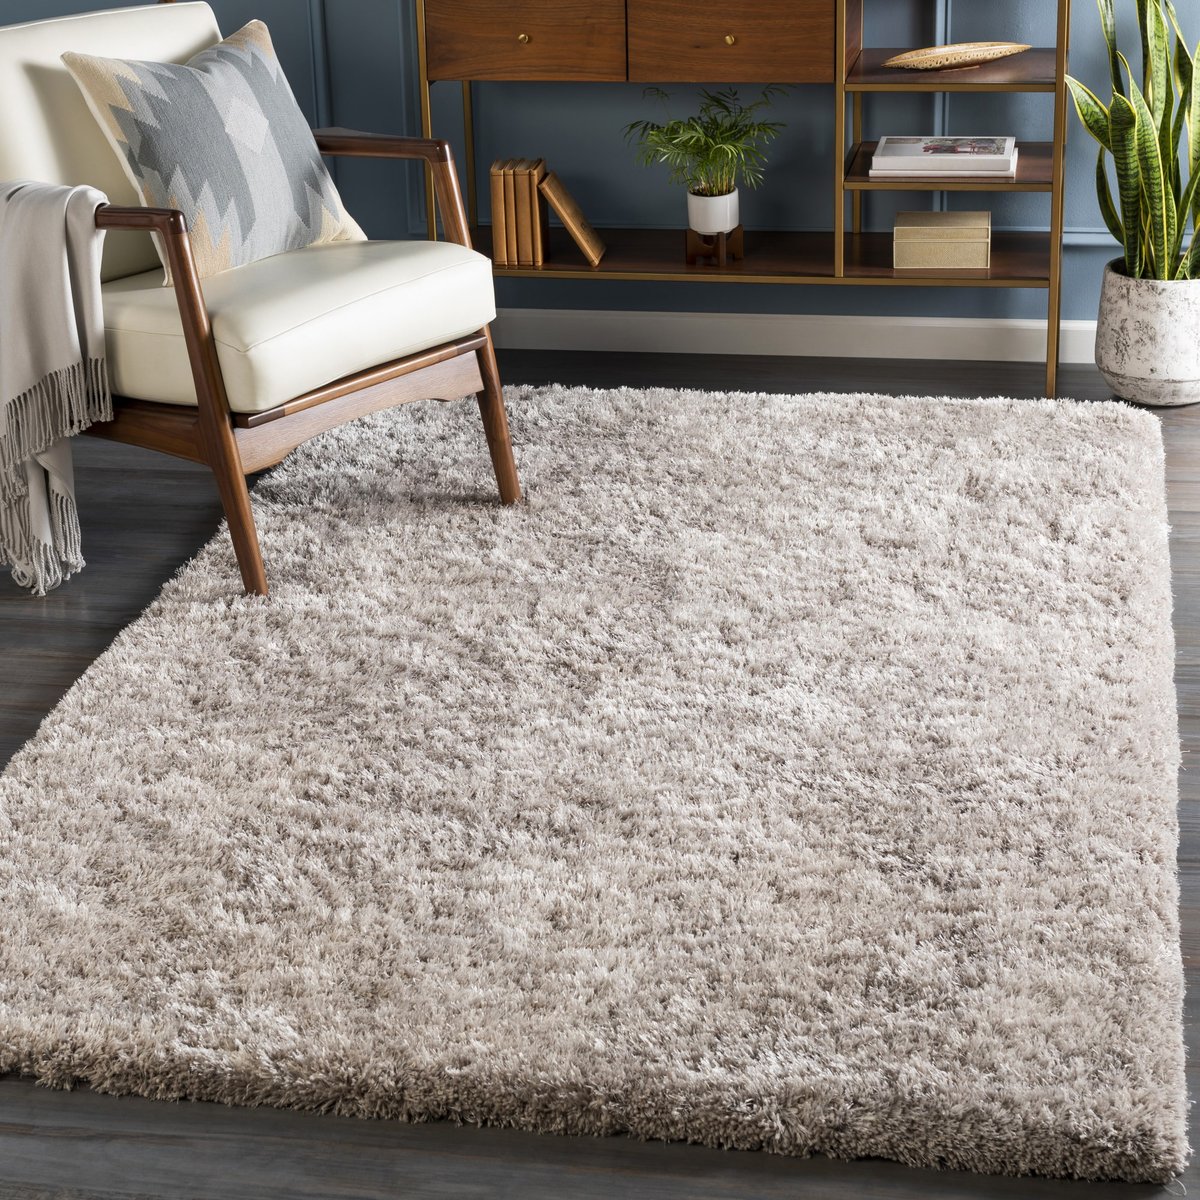 Grizzly Shag - Best Shag Rugs